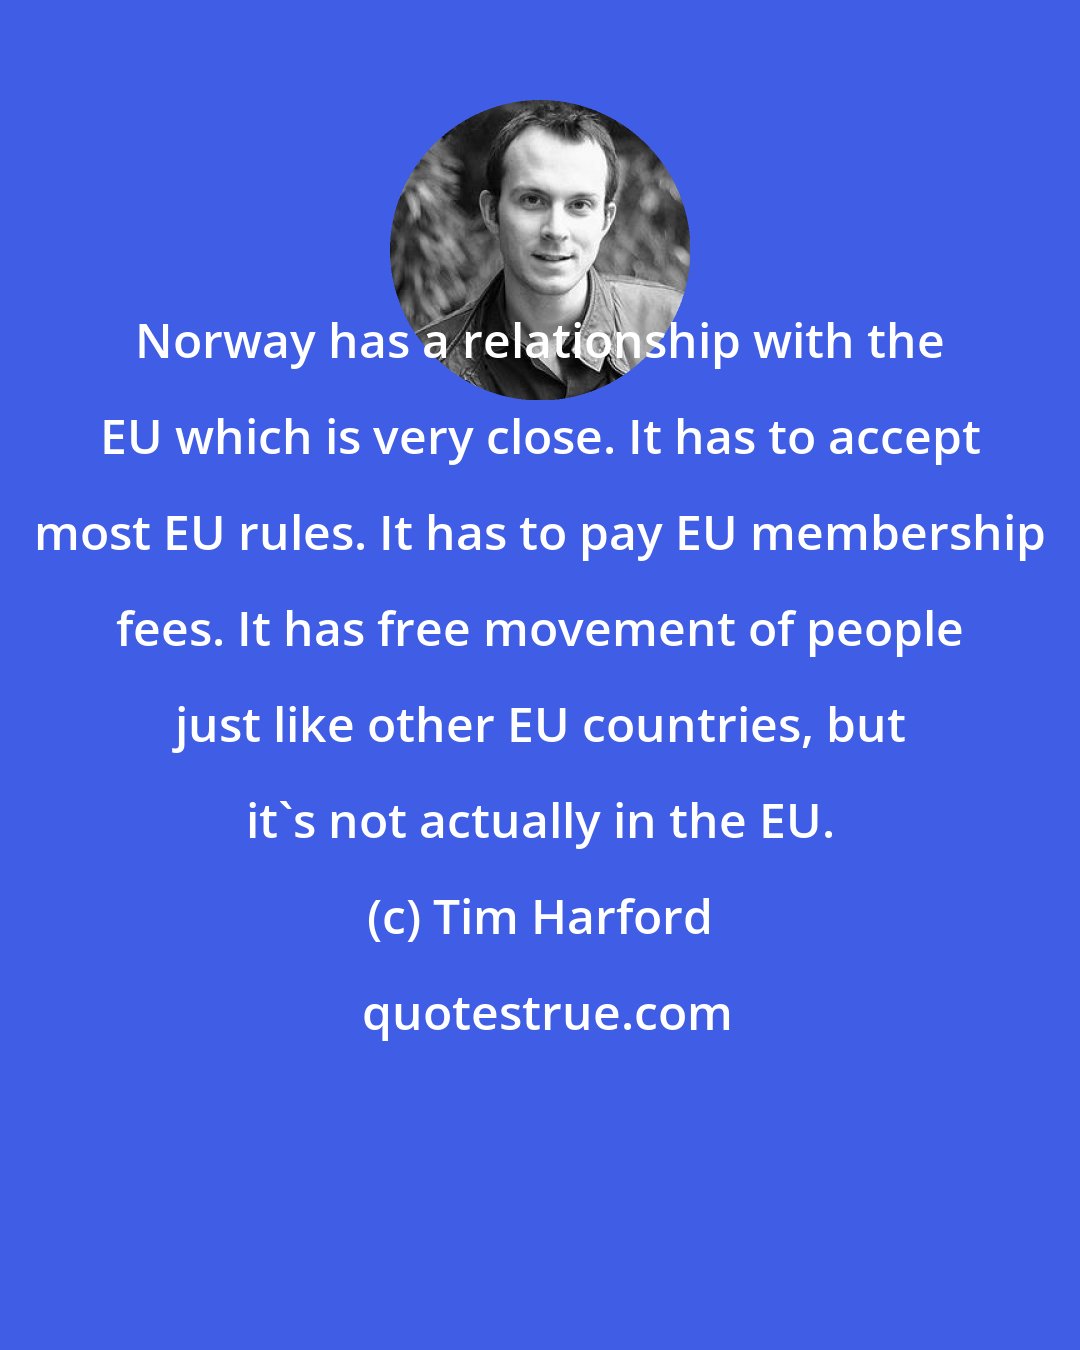 Tim Harford: Norway has a relationship with the EU which is very close. It has to accept most EU rules. It has to pay EU membership fees. It has free movement of people just like other EU countries, but it's not actually in the EU.